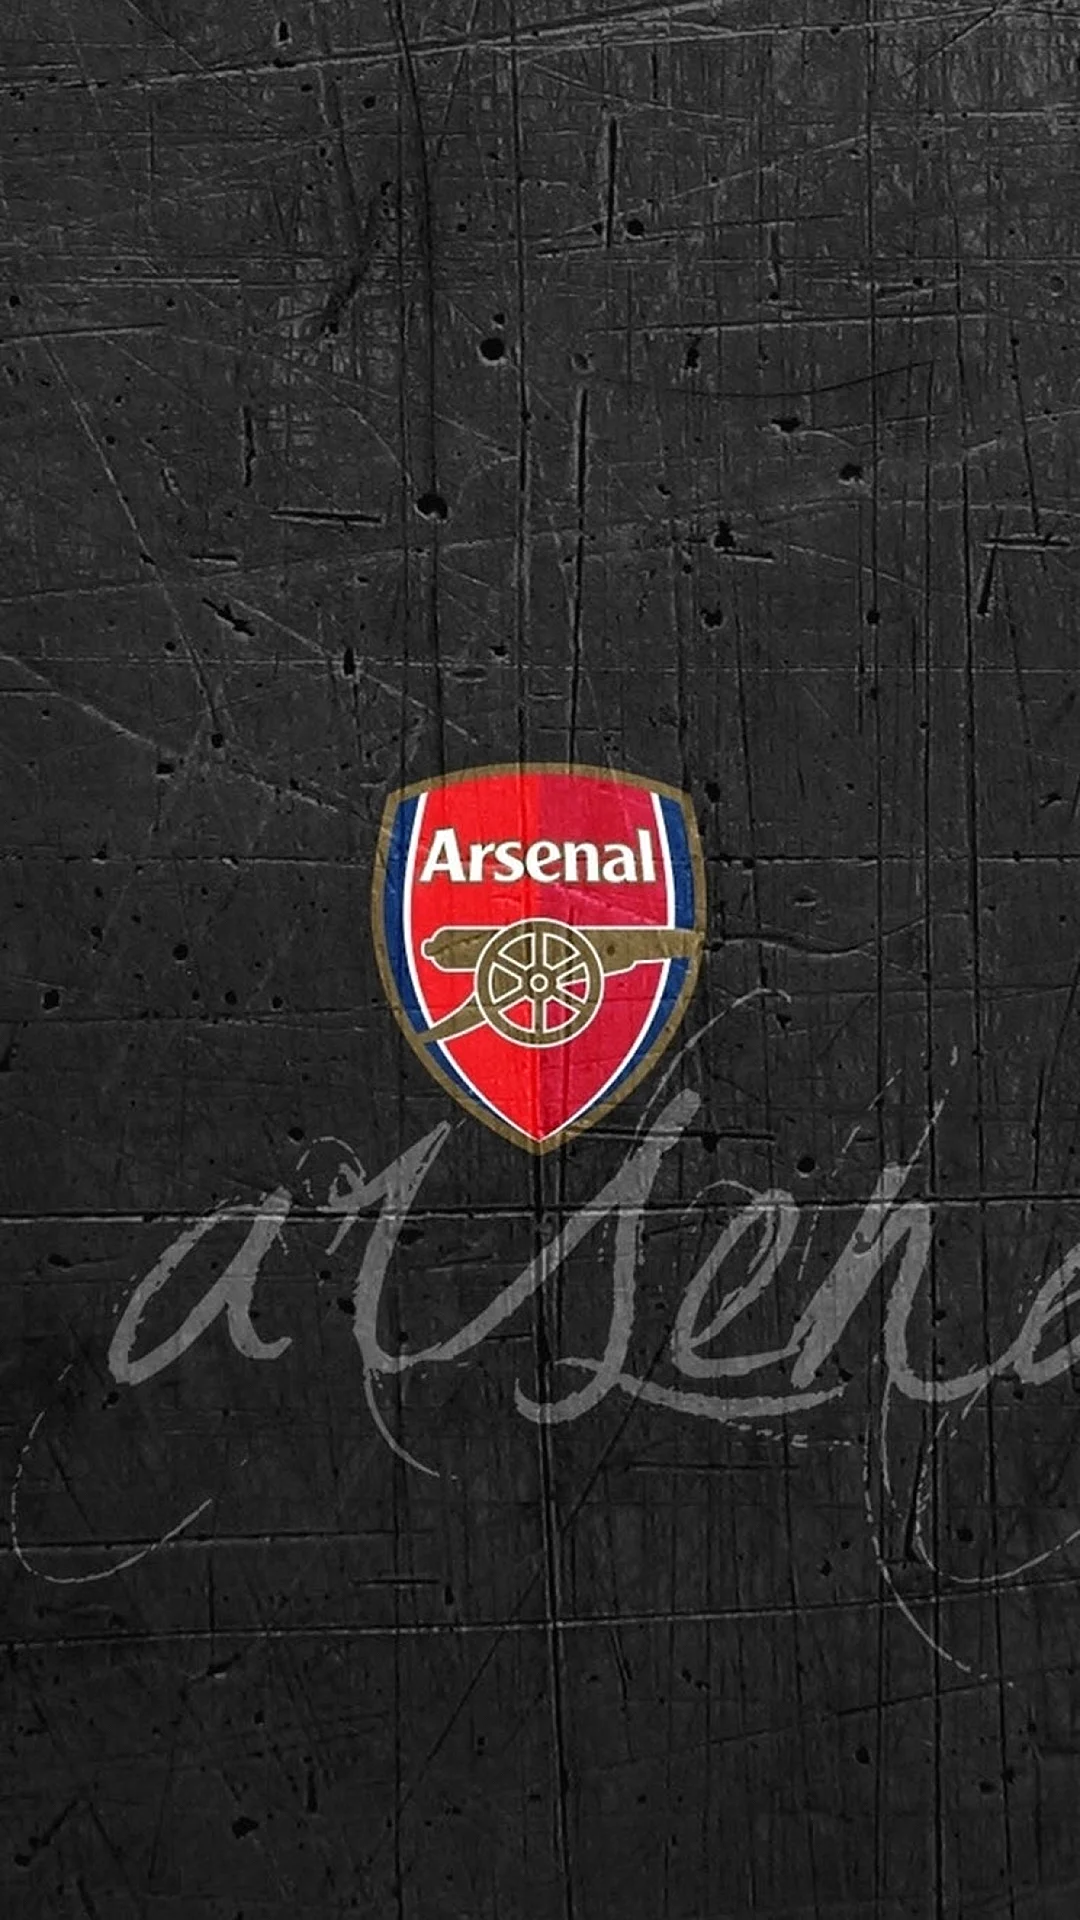 Arsenal Fc Designs Wallpaper For iPhone